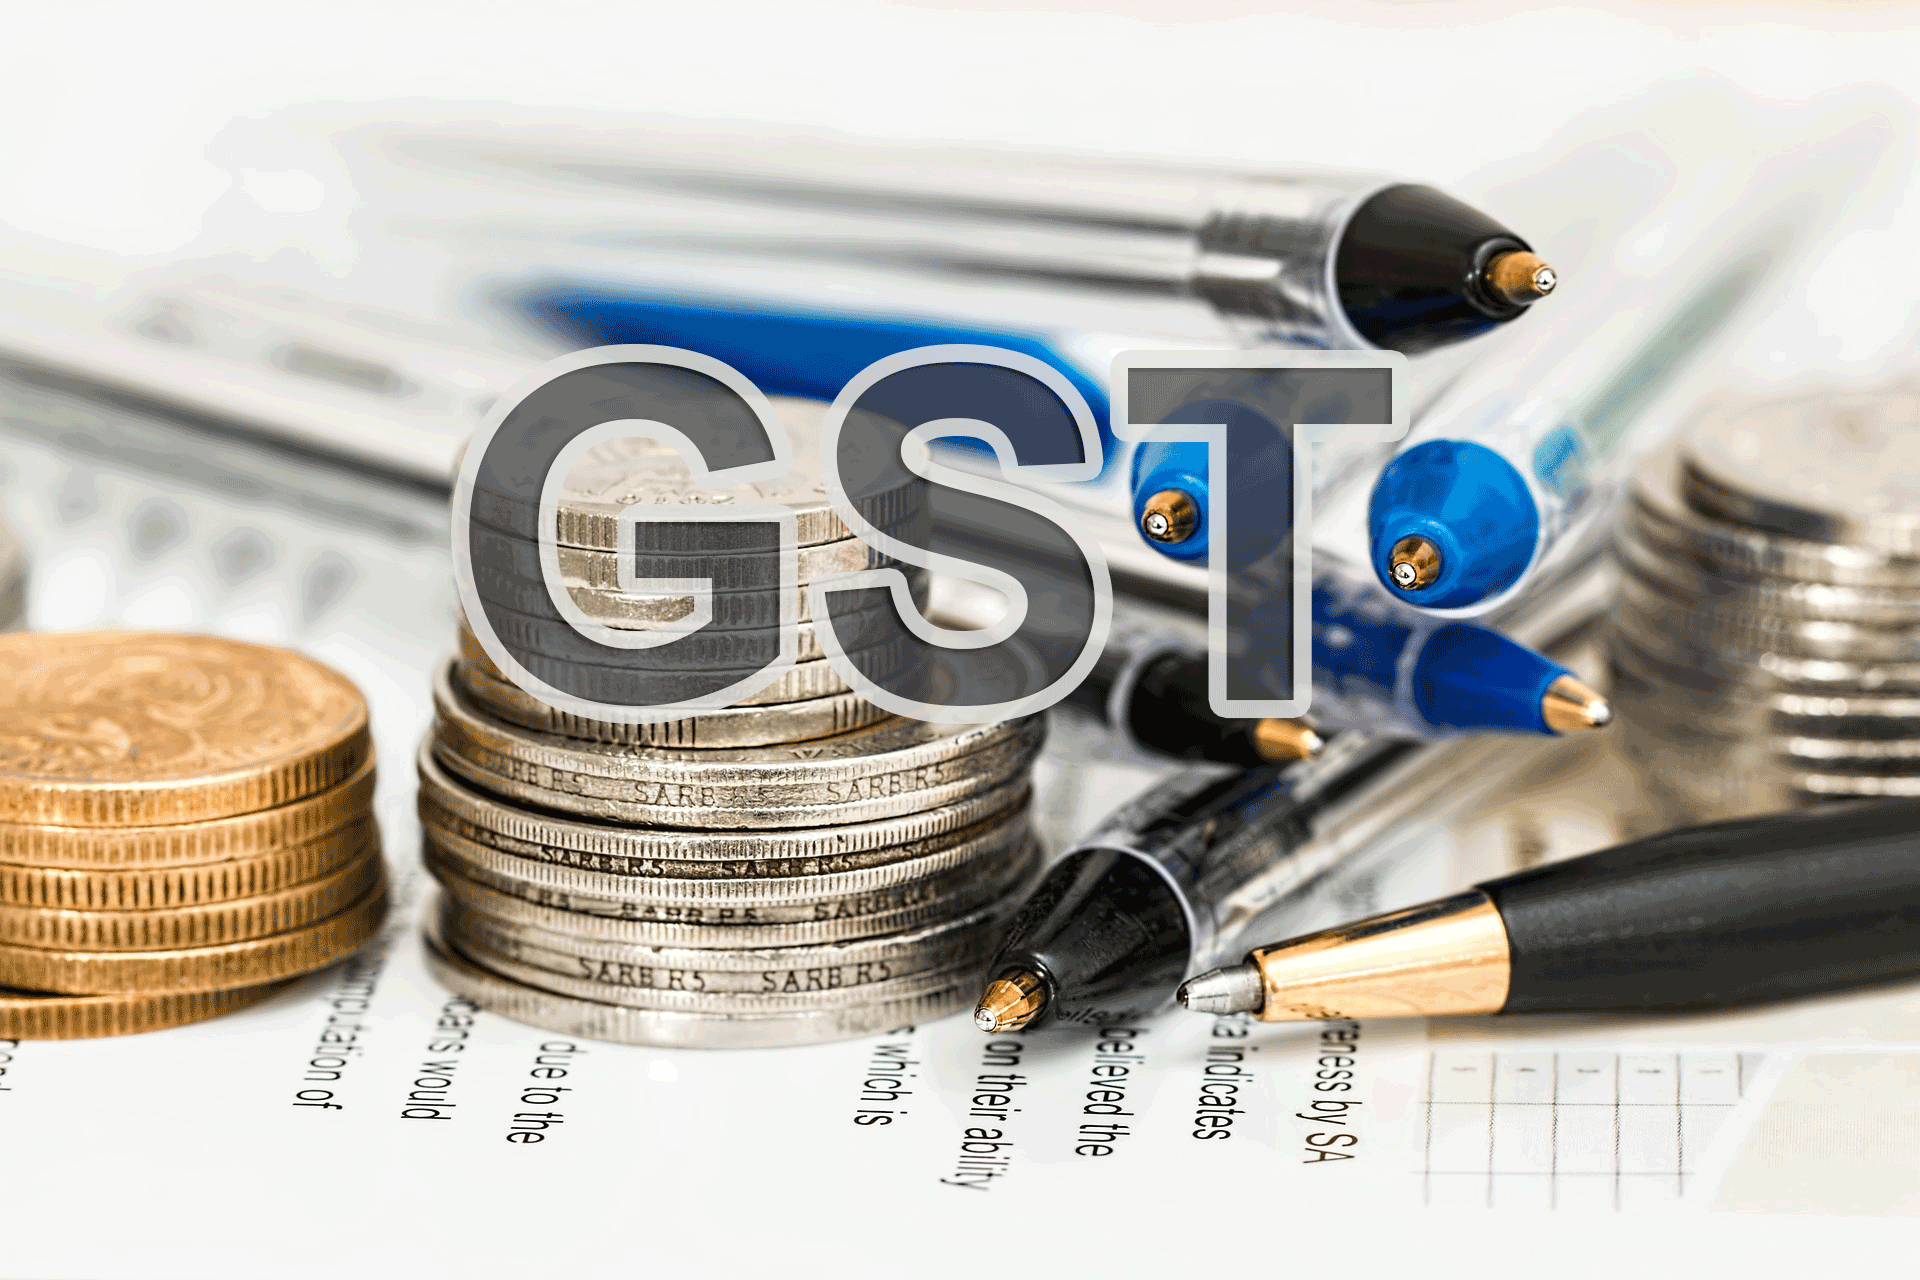 Declaring GST is a process in which taxable entities report and submit forms and relevant documents to tax authority